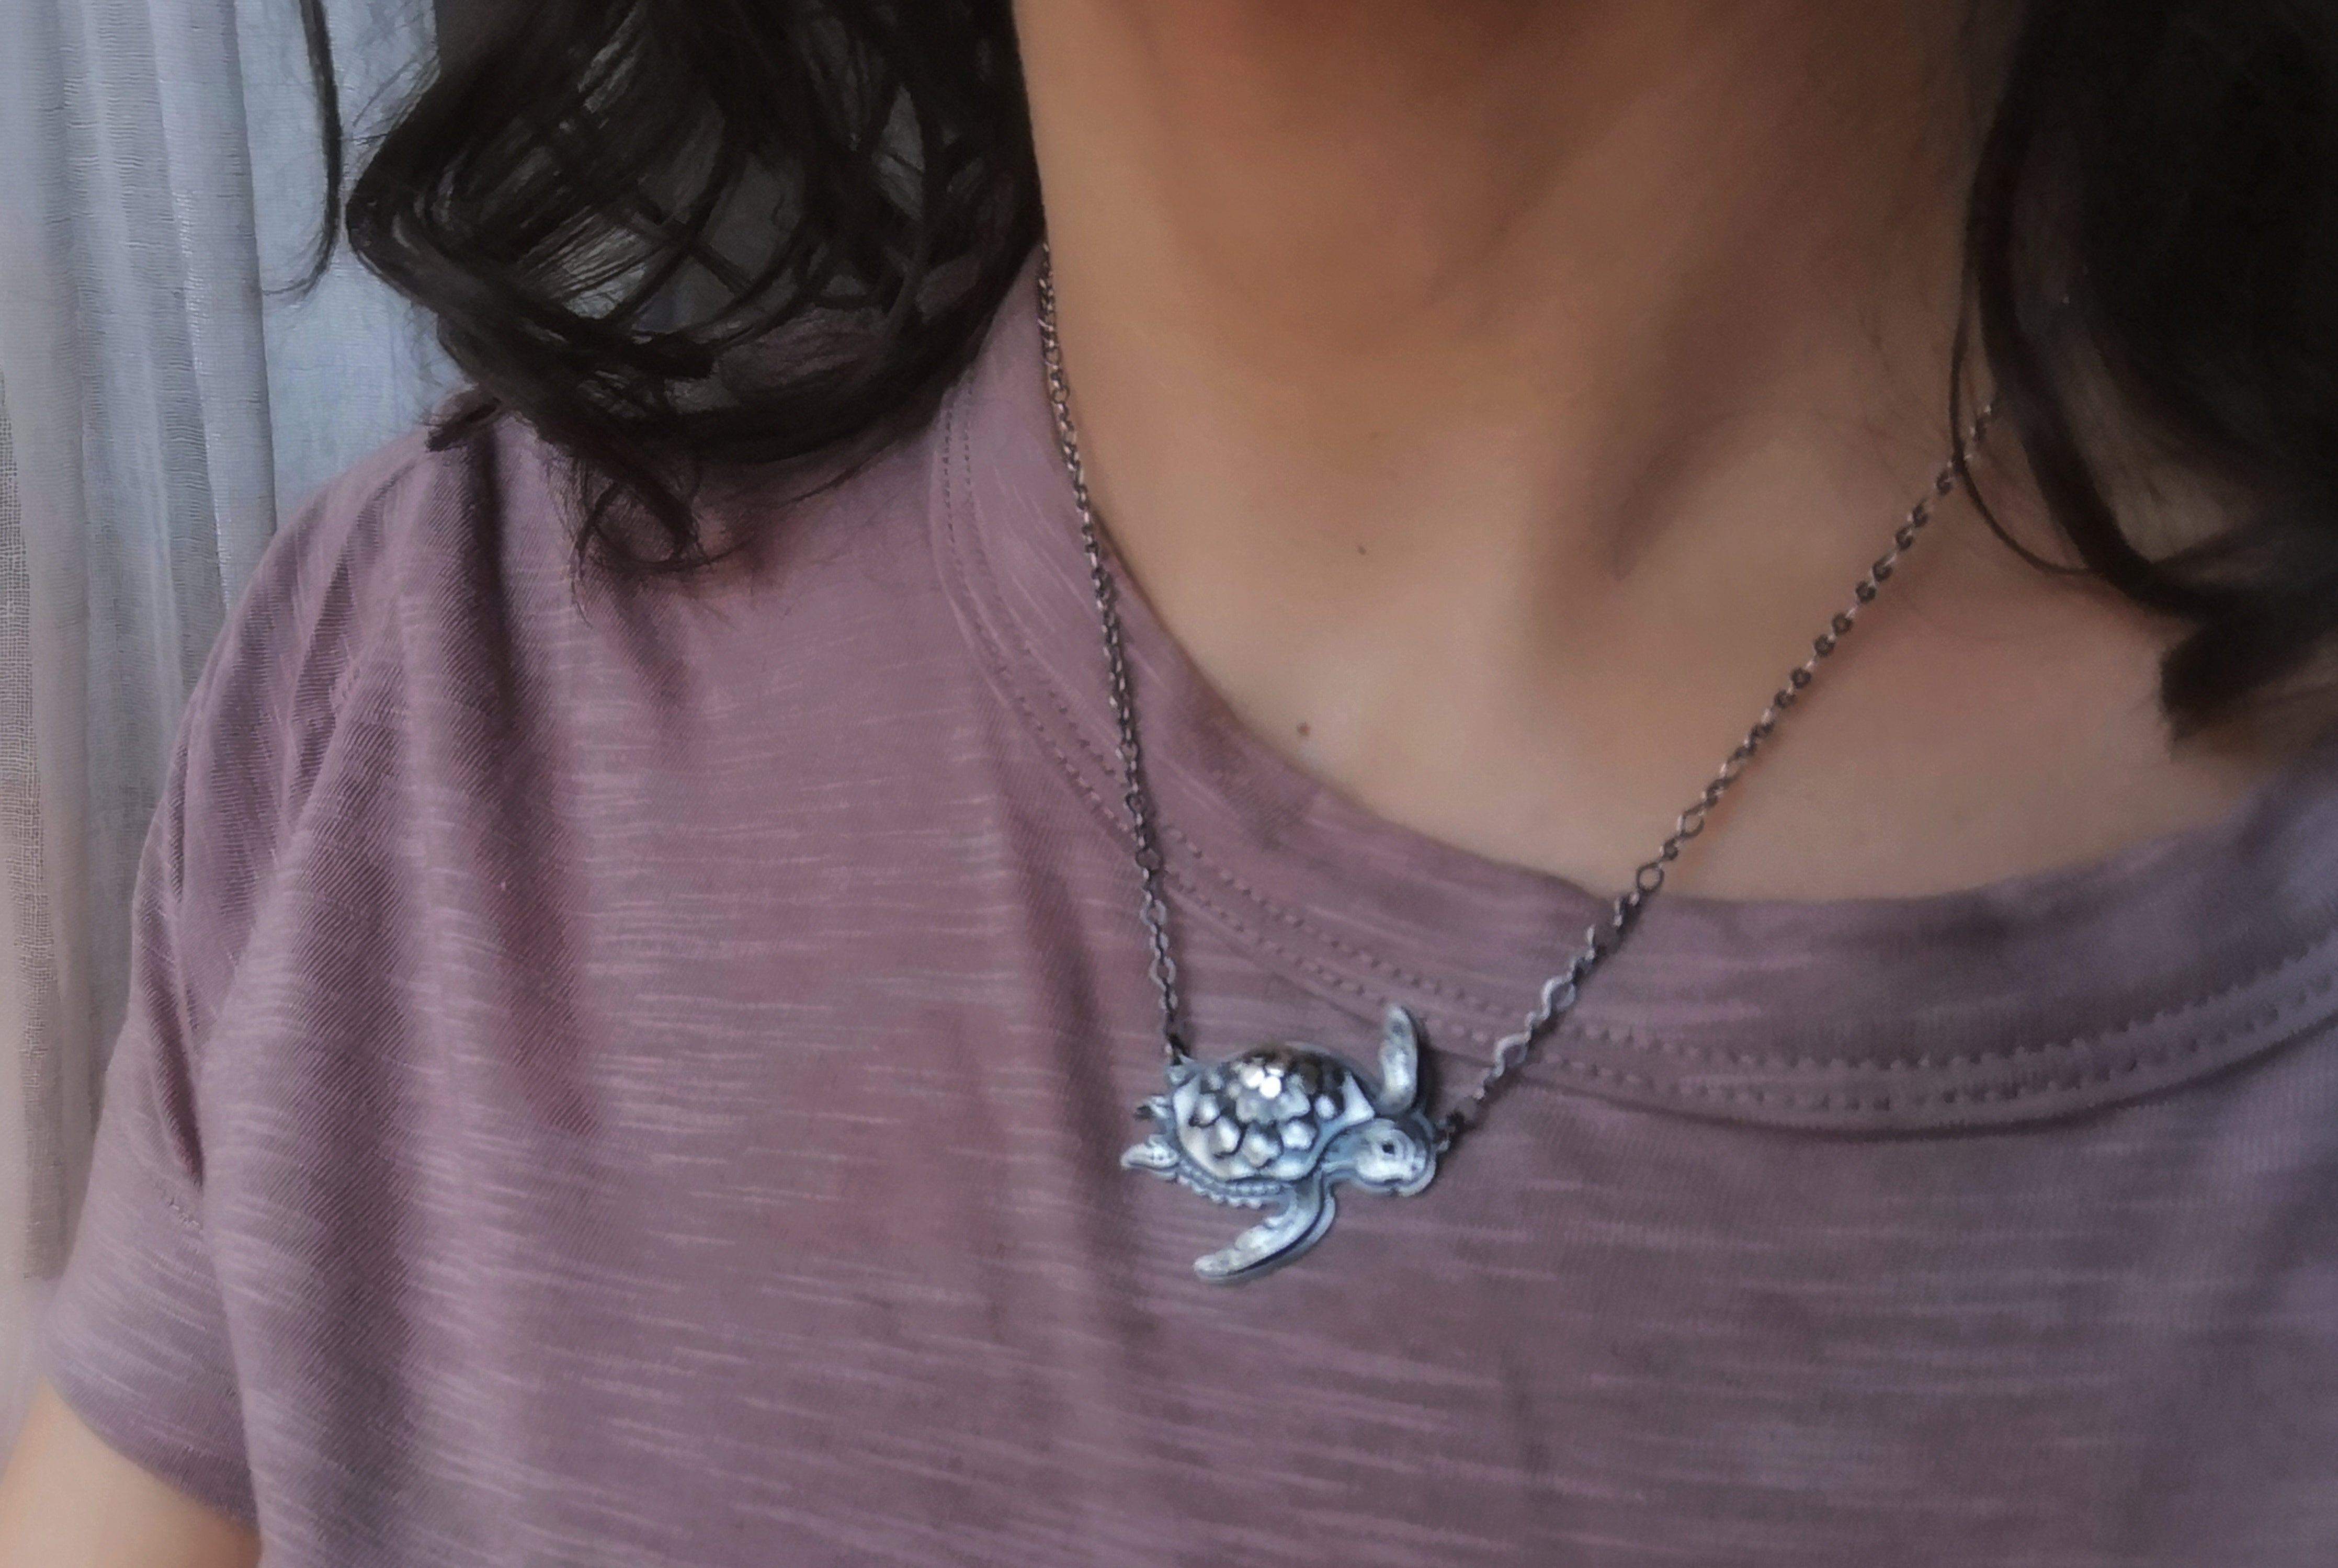 The Turtle Necklace